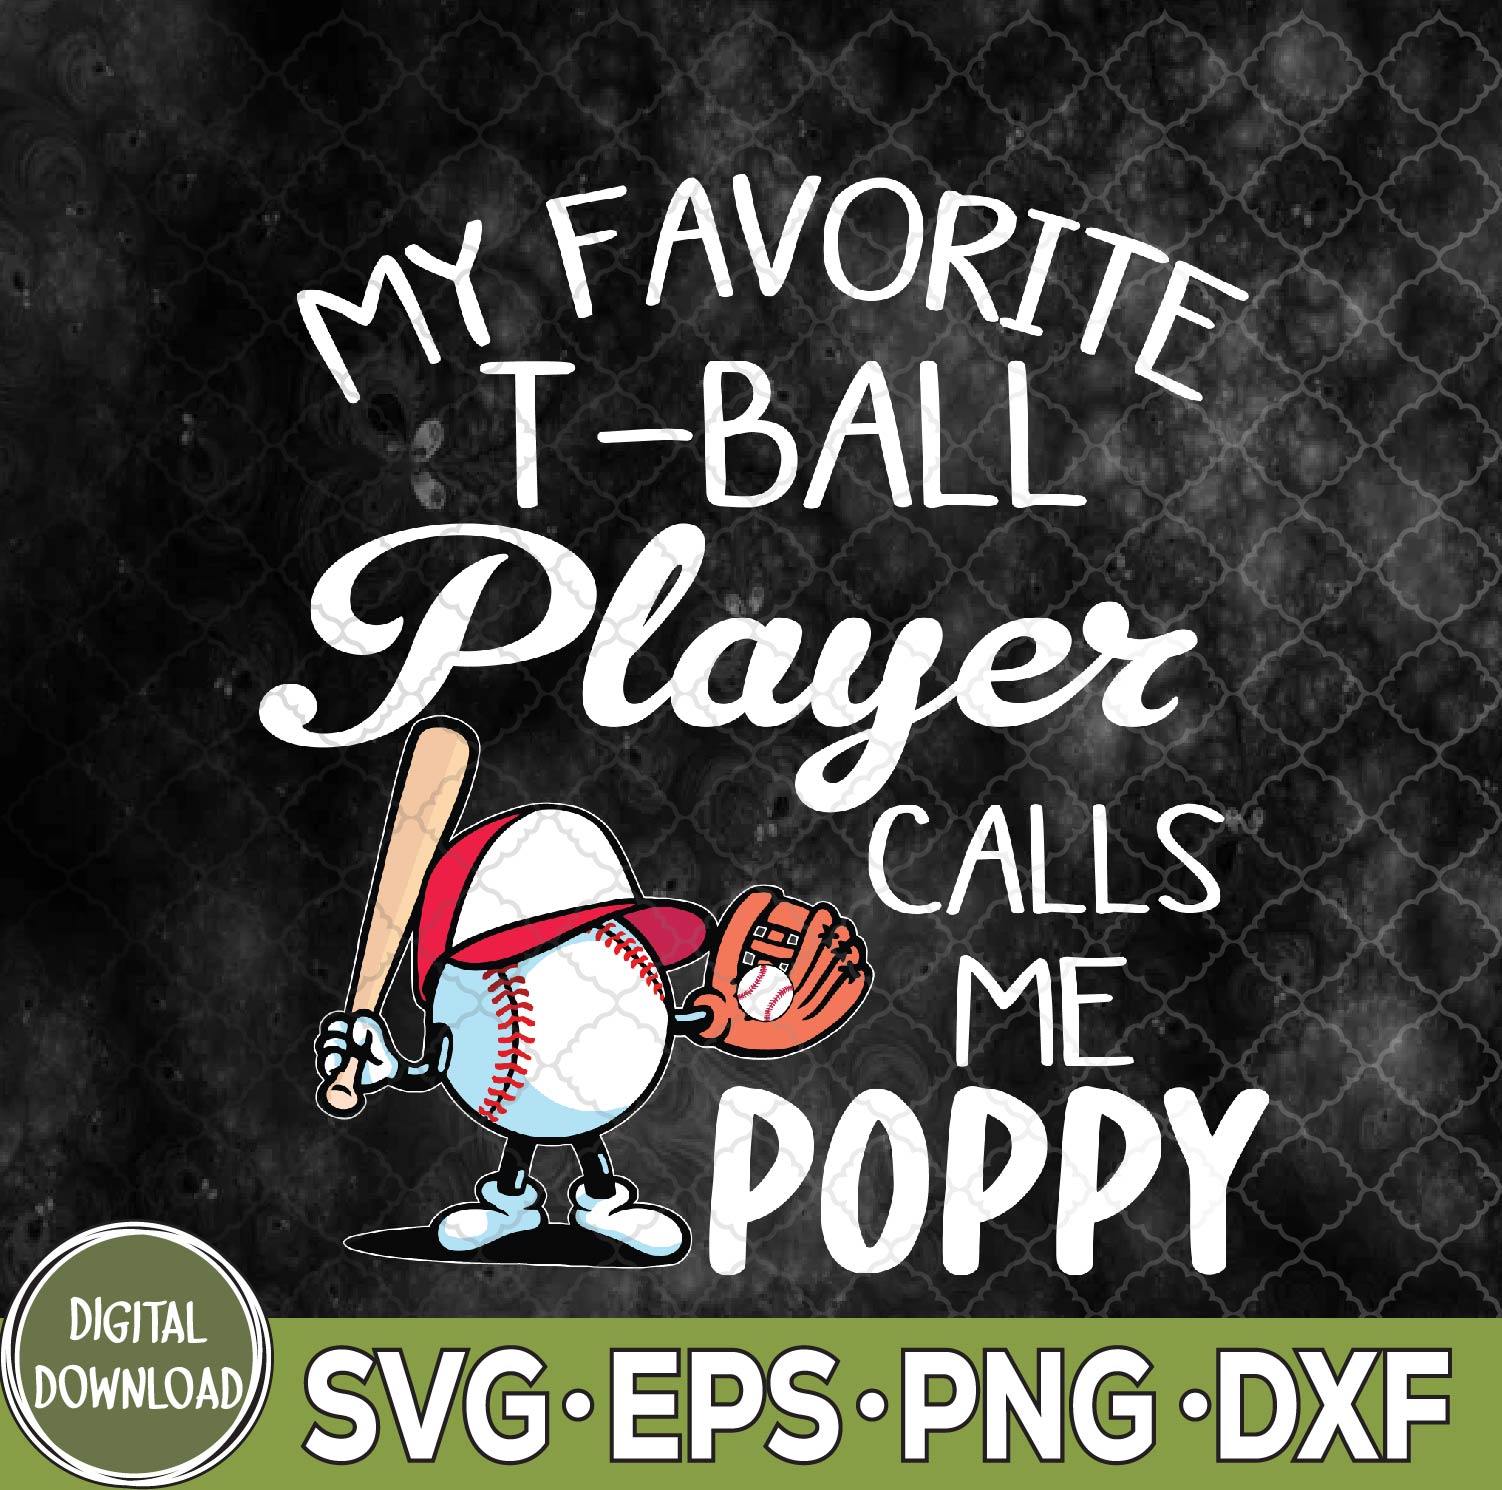 WTMNEW9file 09 172 My Favorite T-Ball Player Calls Me Poppy Father's Day Svg, Png, Digital Download